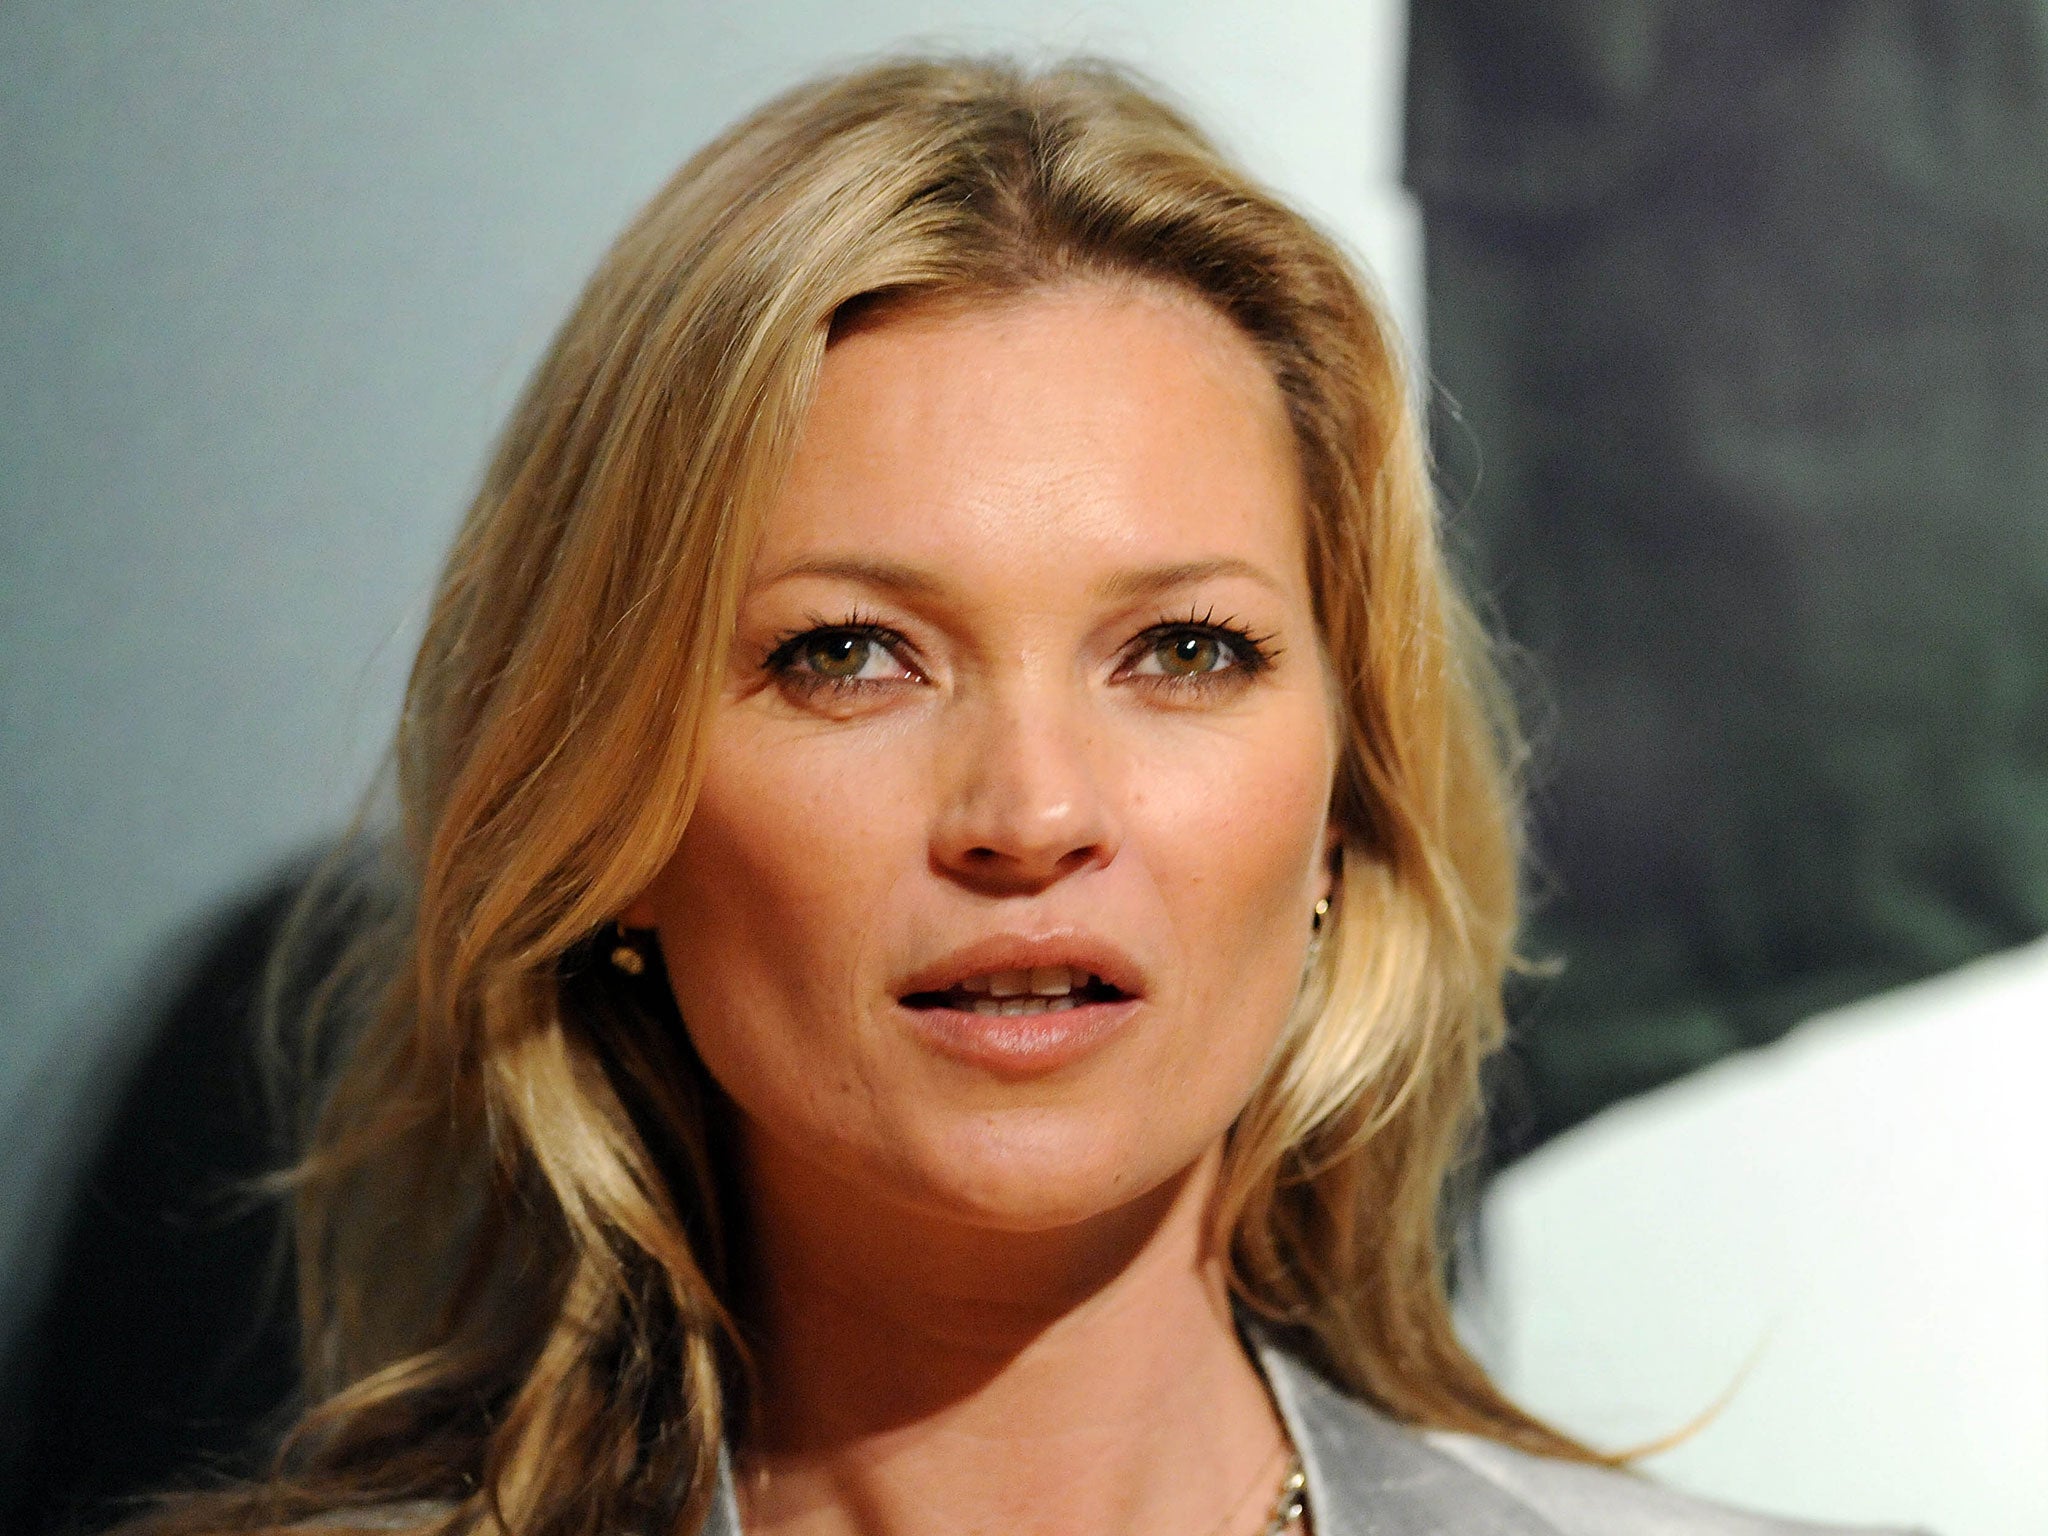 Kate Moss will make a cameo appearance in David Walliams' The Boy in the Dress